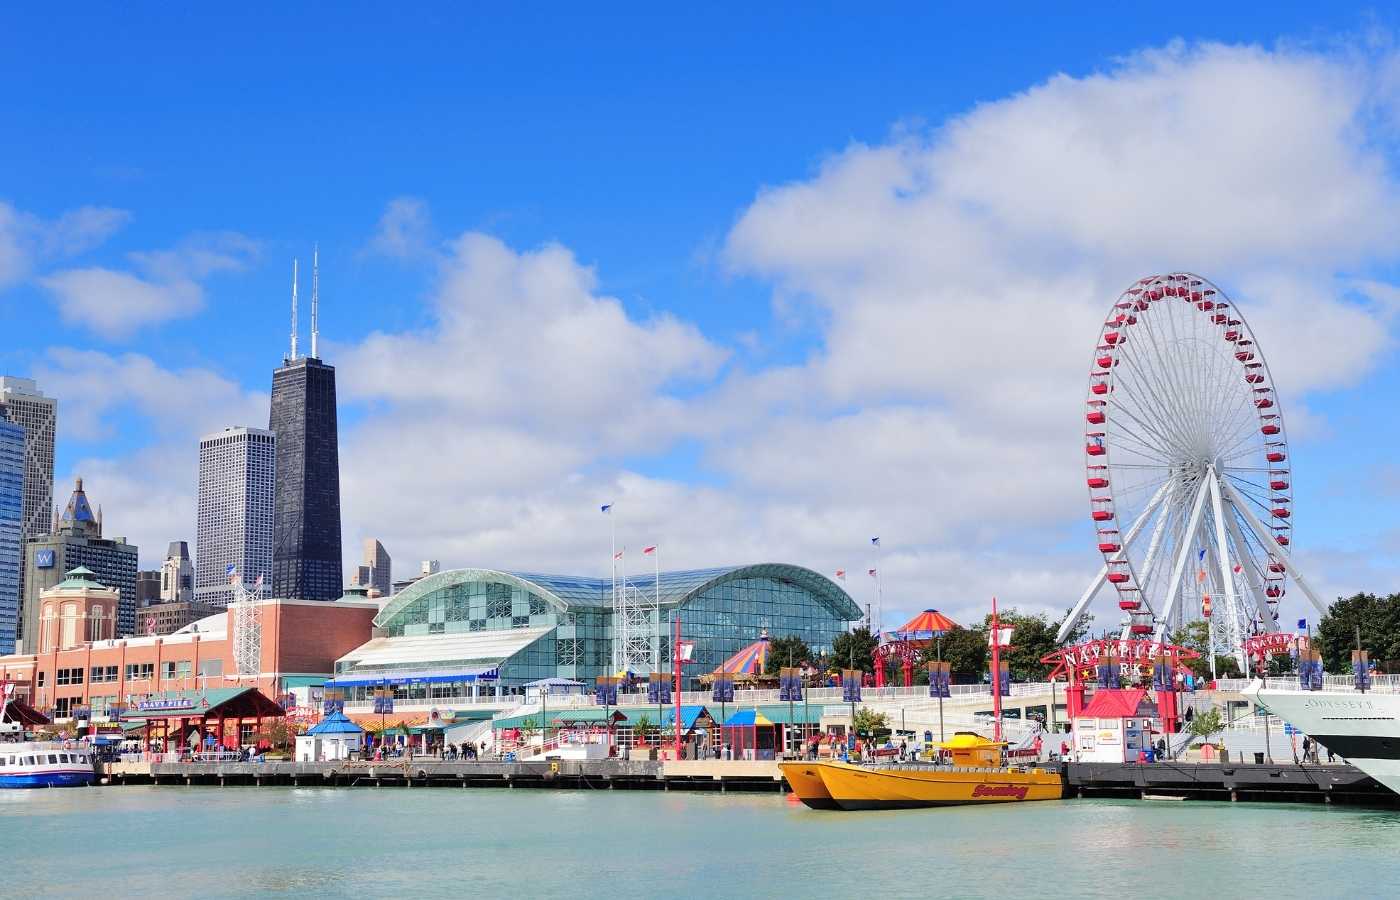 See Chicago's cultural sites with a day trip to Millennium Park and Navy Pier